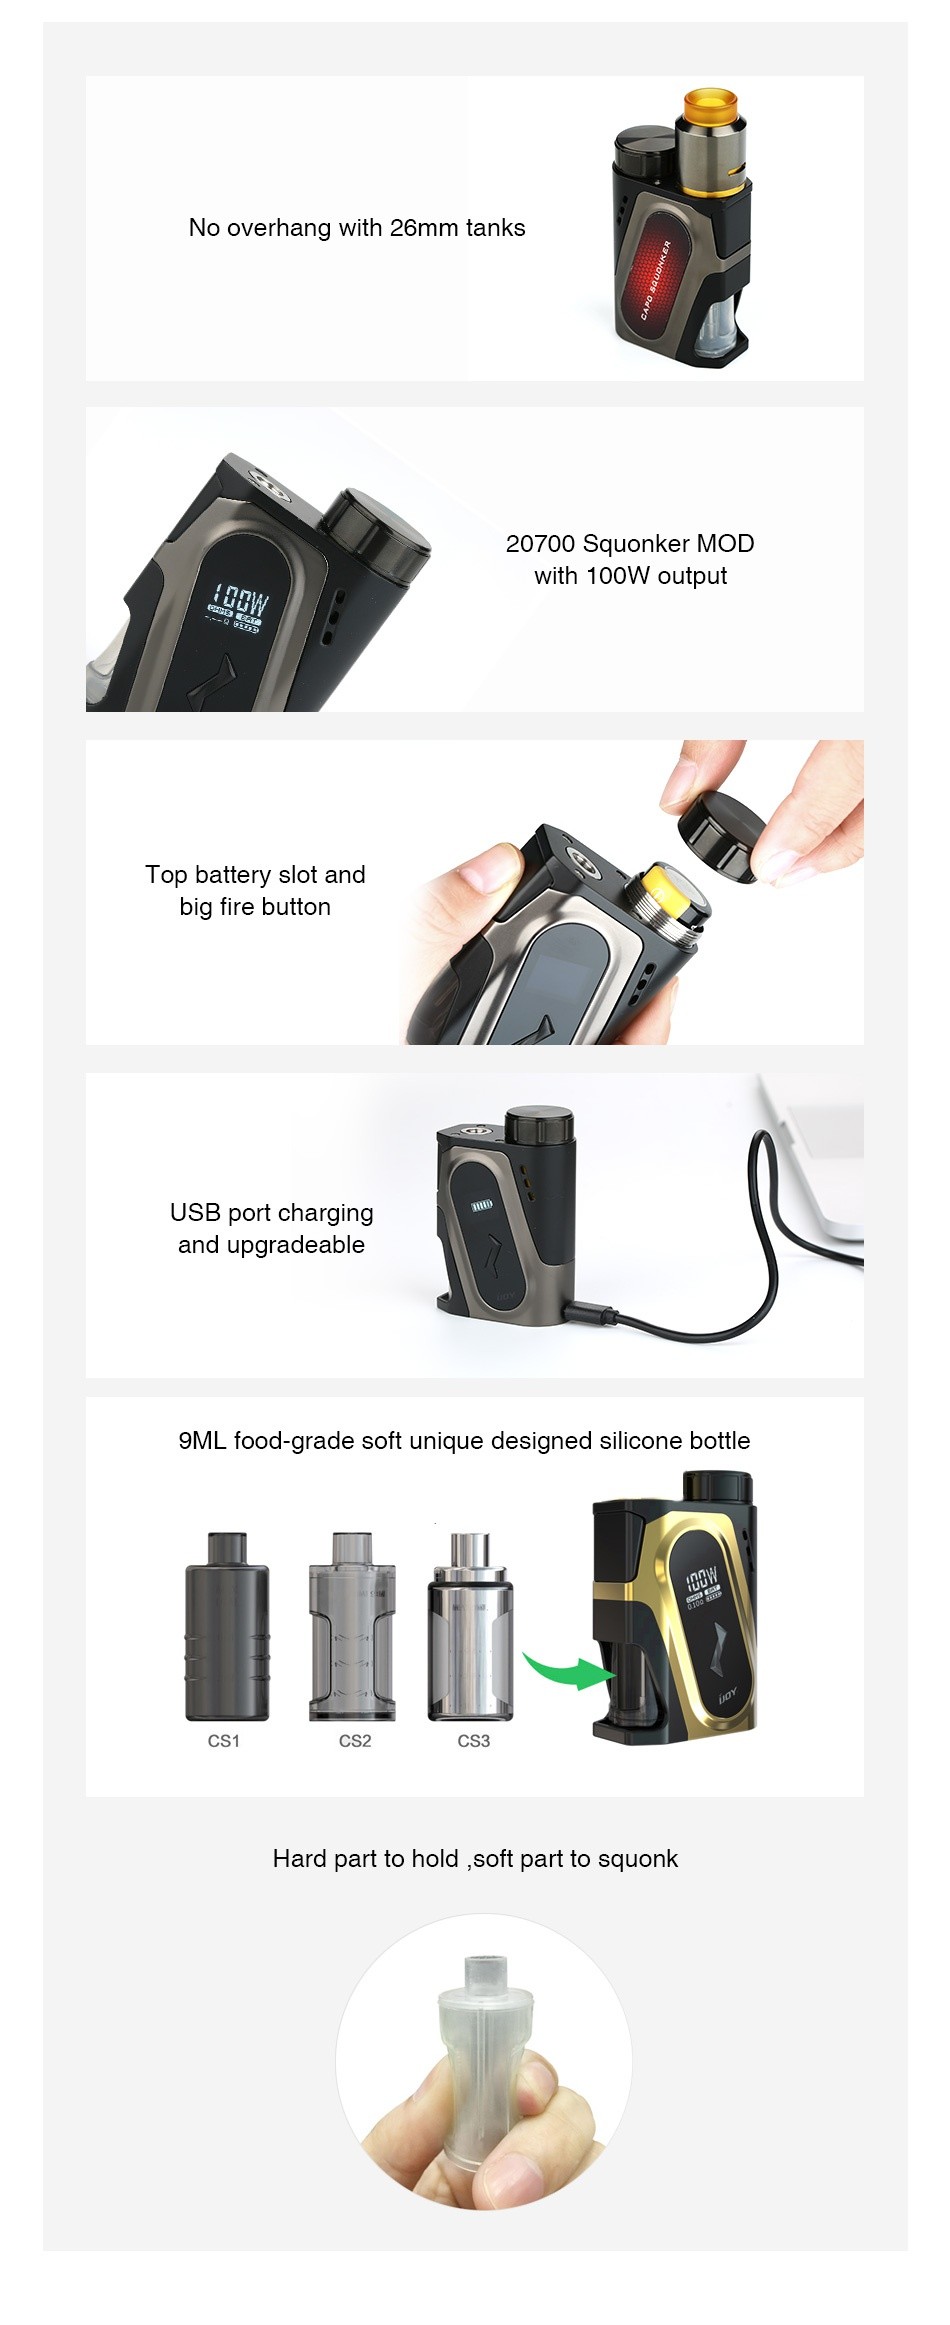 IJOY CAPO 100W 20700 Squonker MOD 3000mAh No overhand with 26mm tanks 20700 Squonker MOD ith 100W outi Top battery slot and big fire button USB and upgradeable 9ML food grade soft unique designed silicone bottle CS3 ard part to hold soft part to squonk